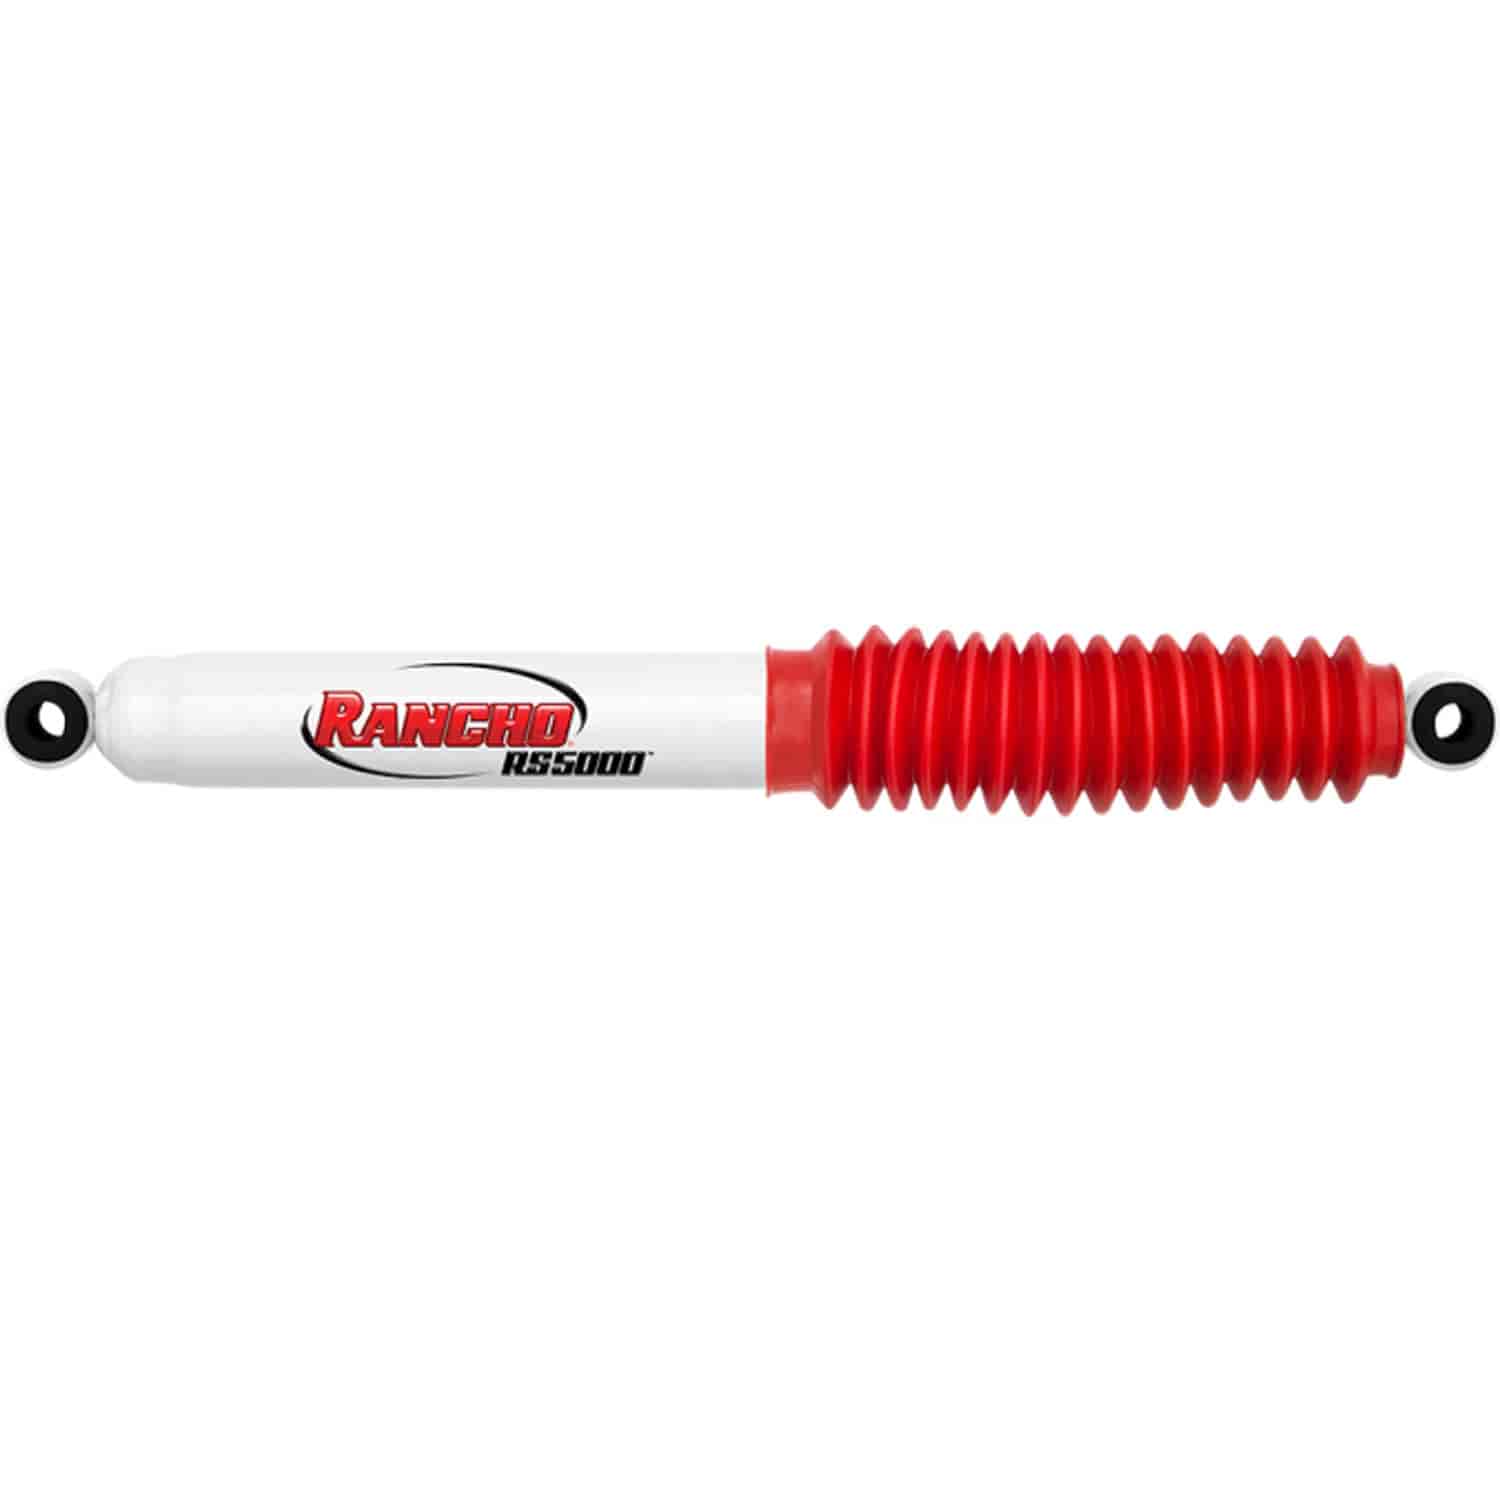 RS5000 Rear Shock Absorber Fits multiple Dodge, Isuzu, Mazda, for Nissan and Toyota mid-sized pickups